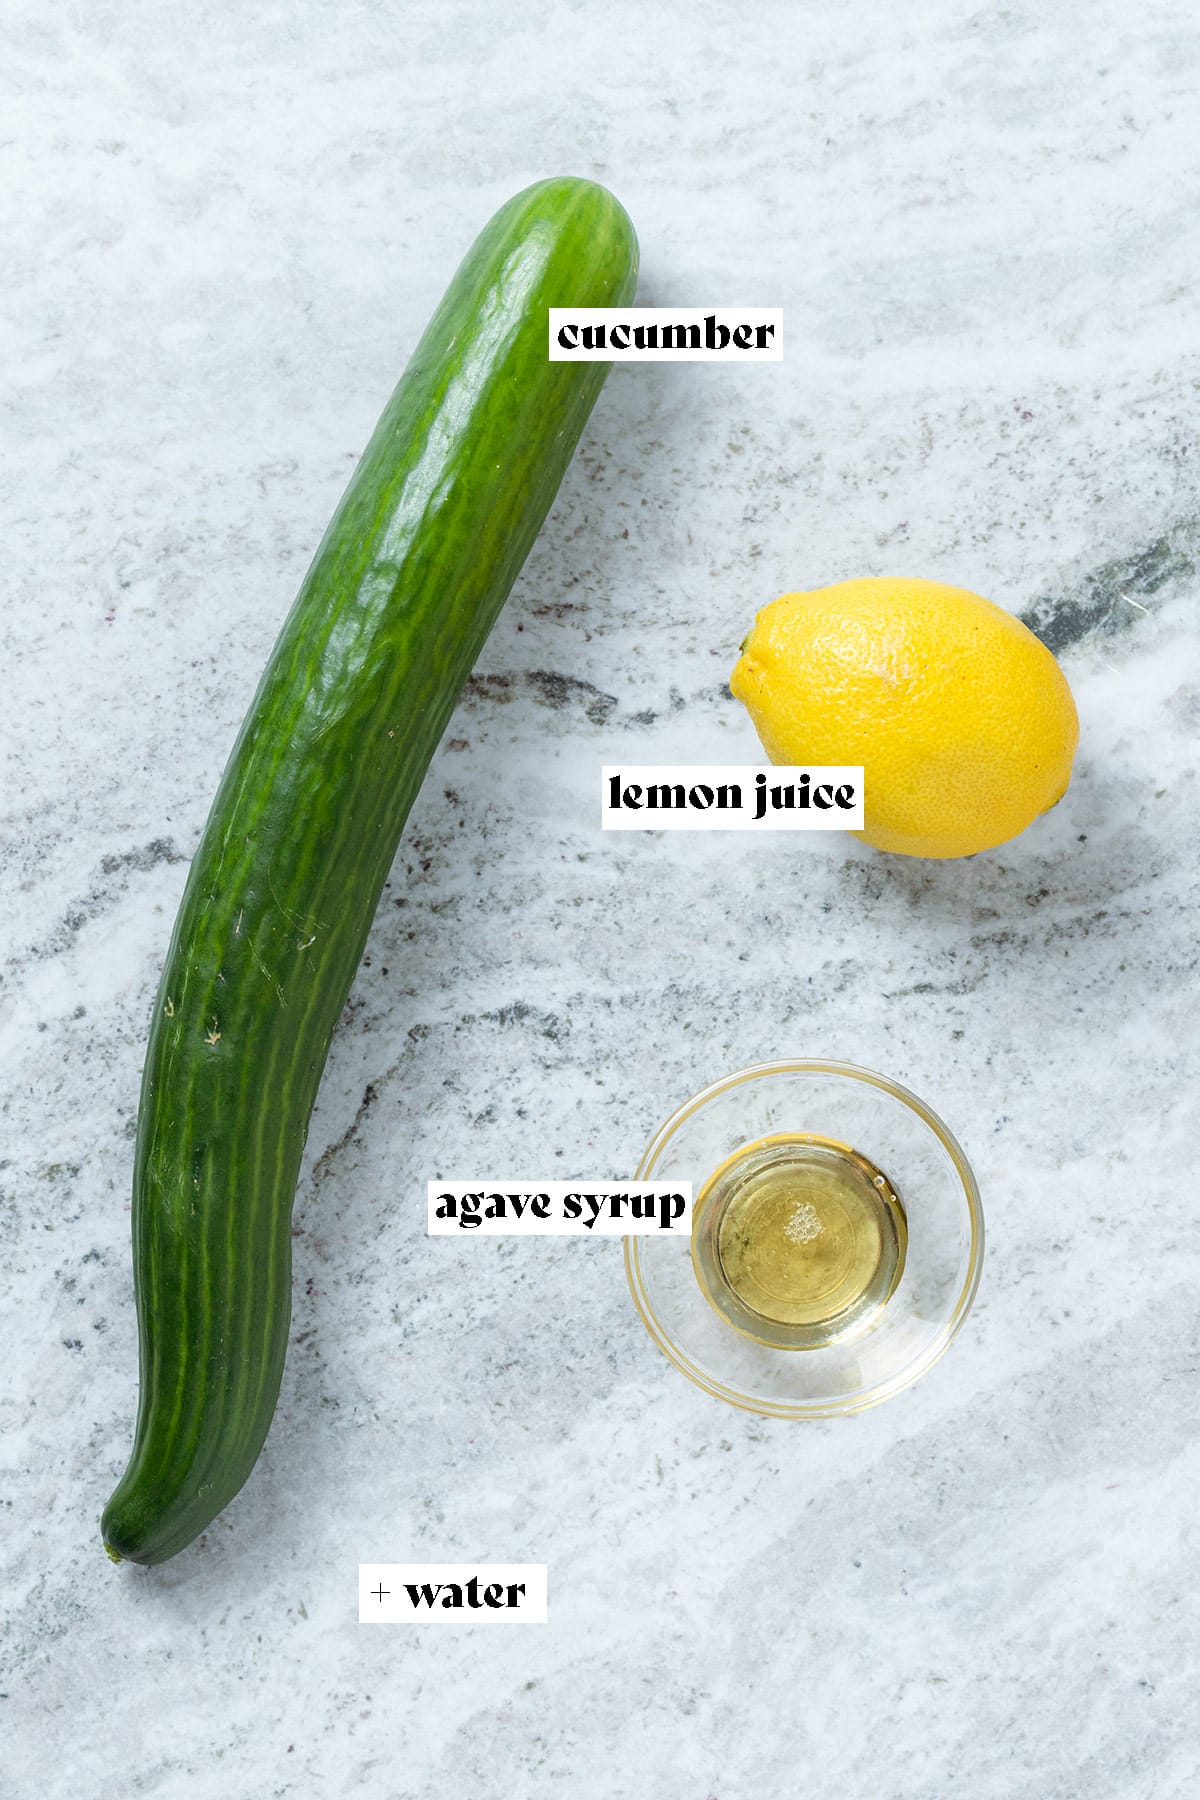 Cucumber, lemon, and agave syrup laid out on a grey stone background with text overlay.